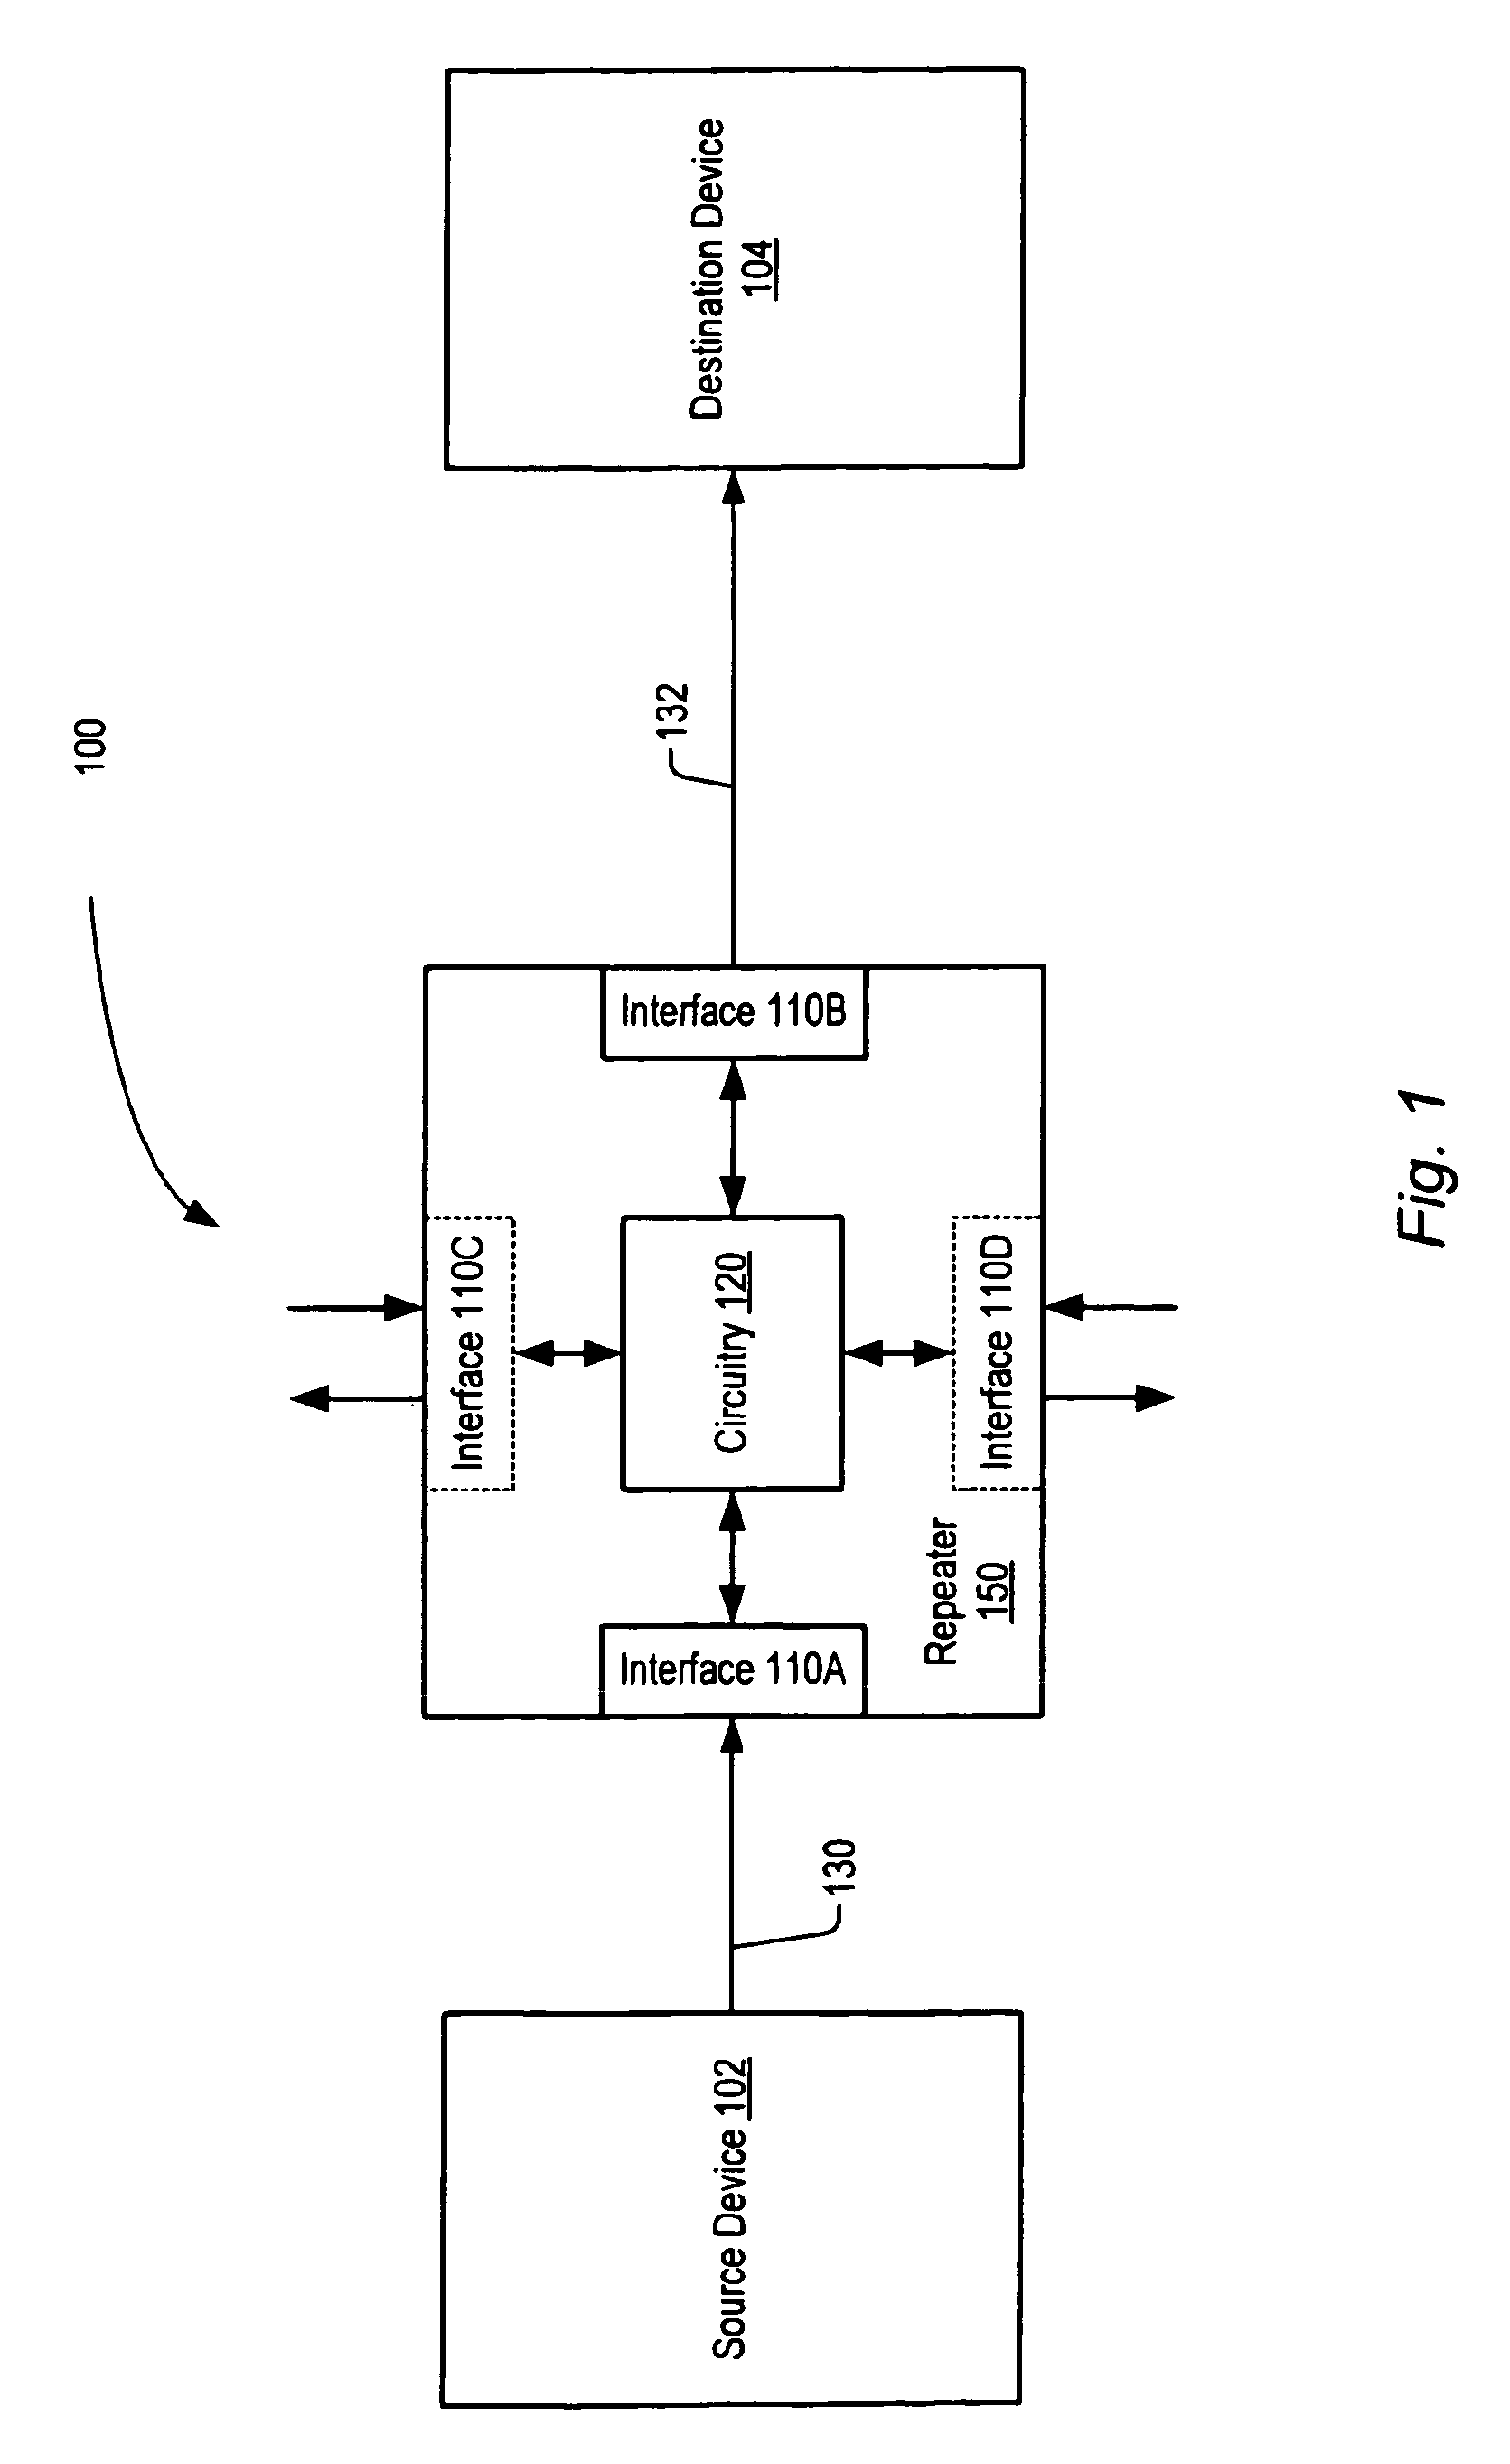 Source synchronous bus repeater